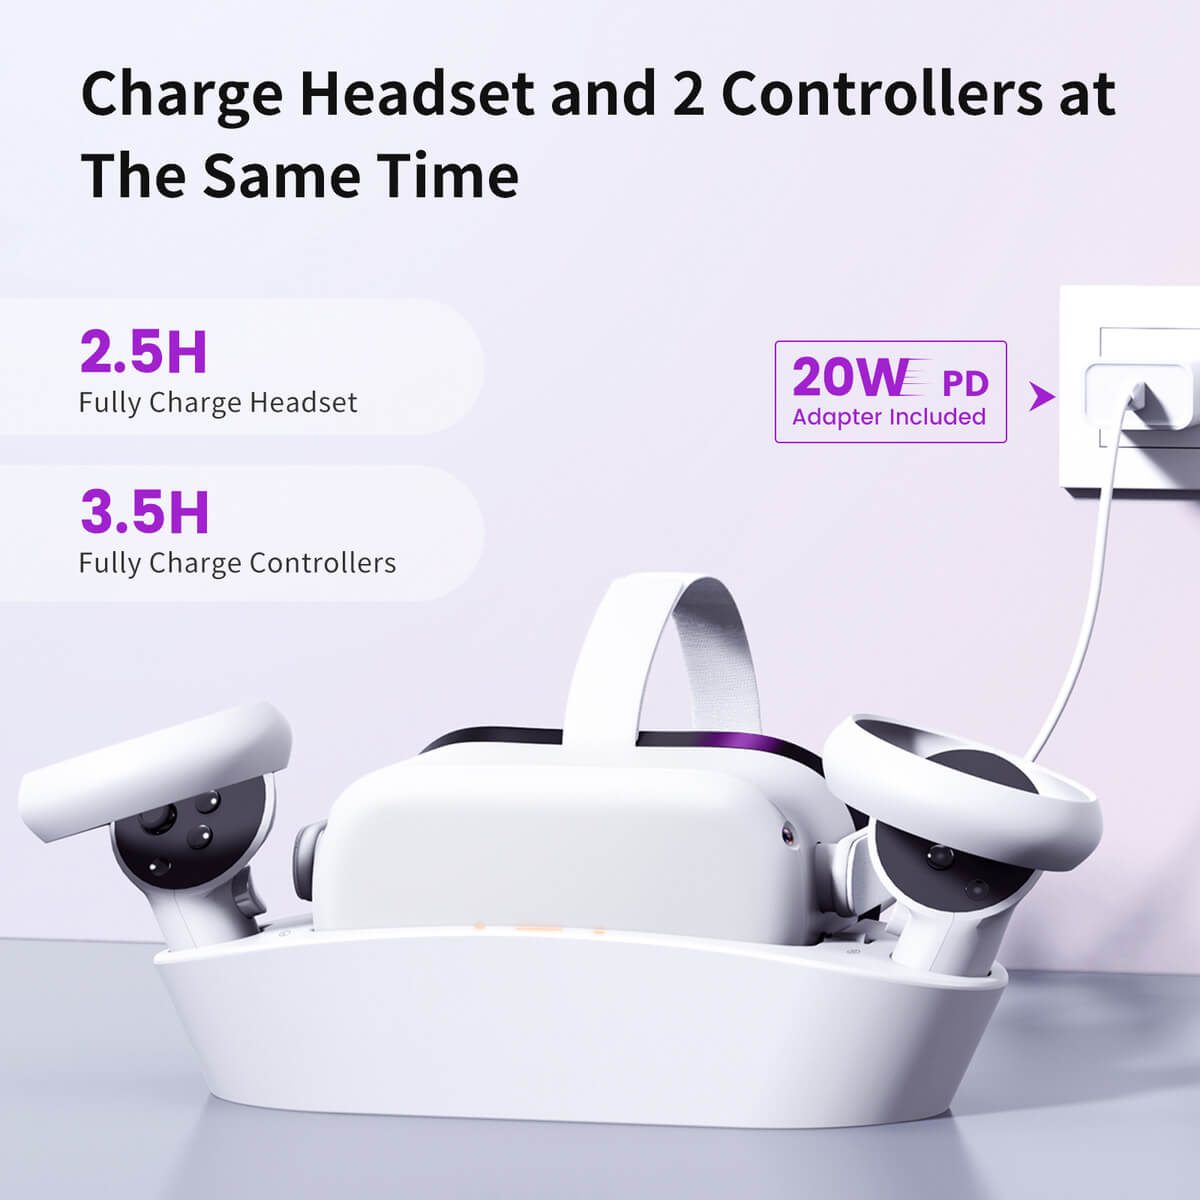 VR Charging Dock for Oculus Quest 2